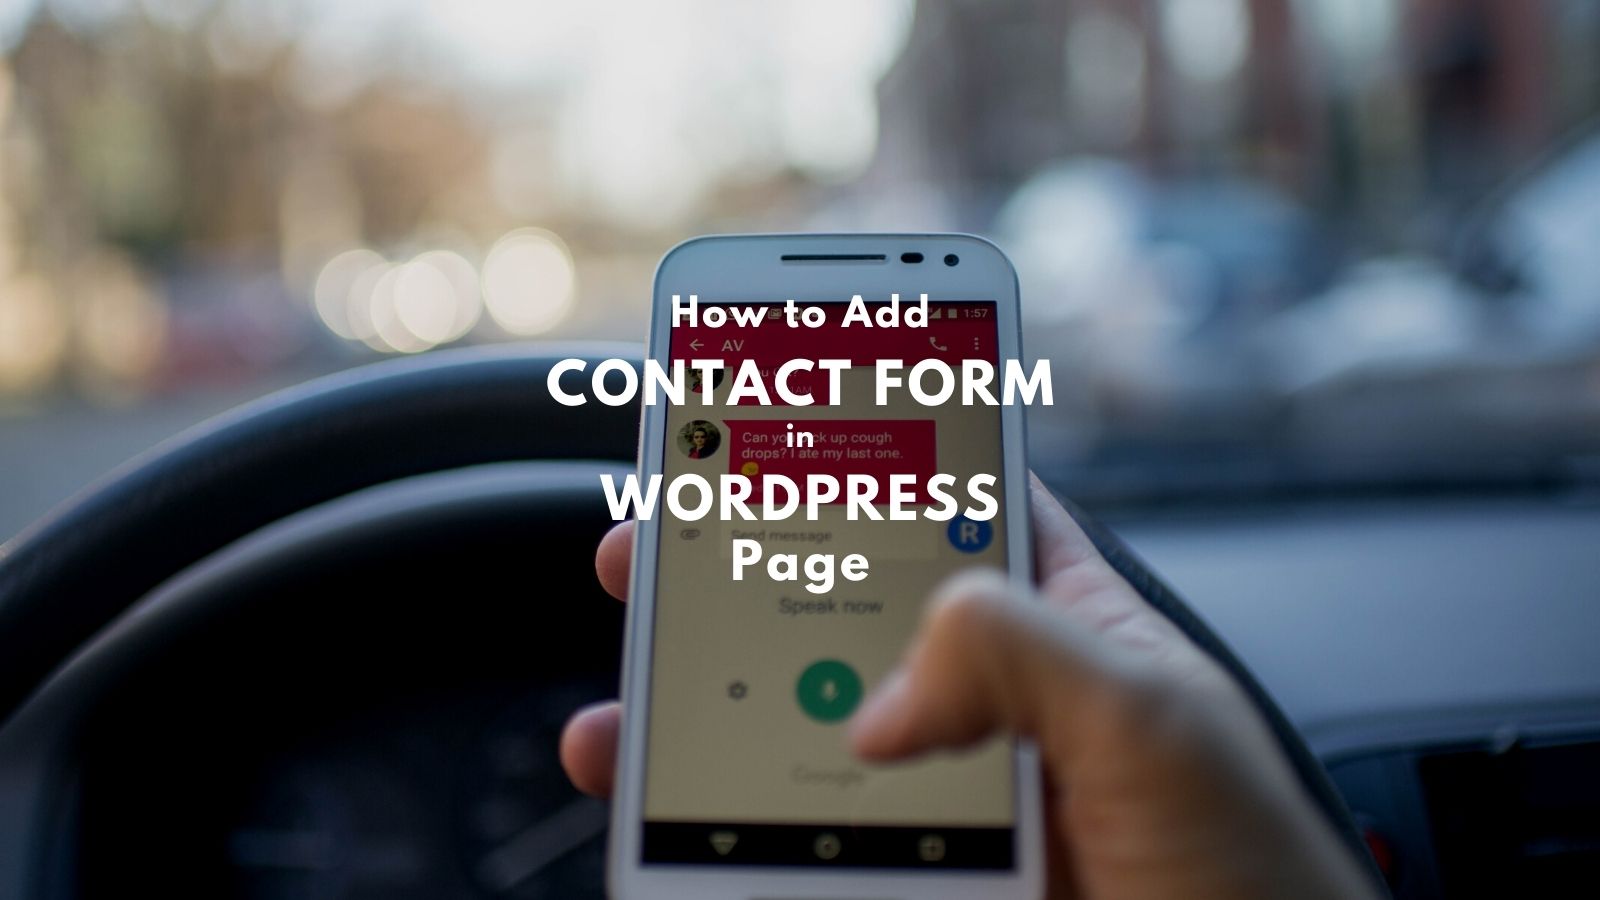 how to add contact form wordpress using jetpack